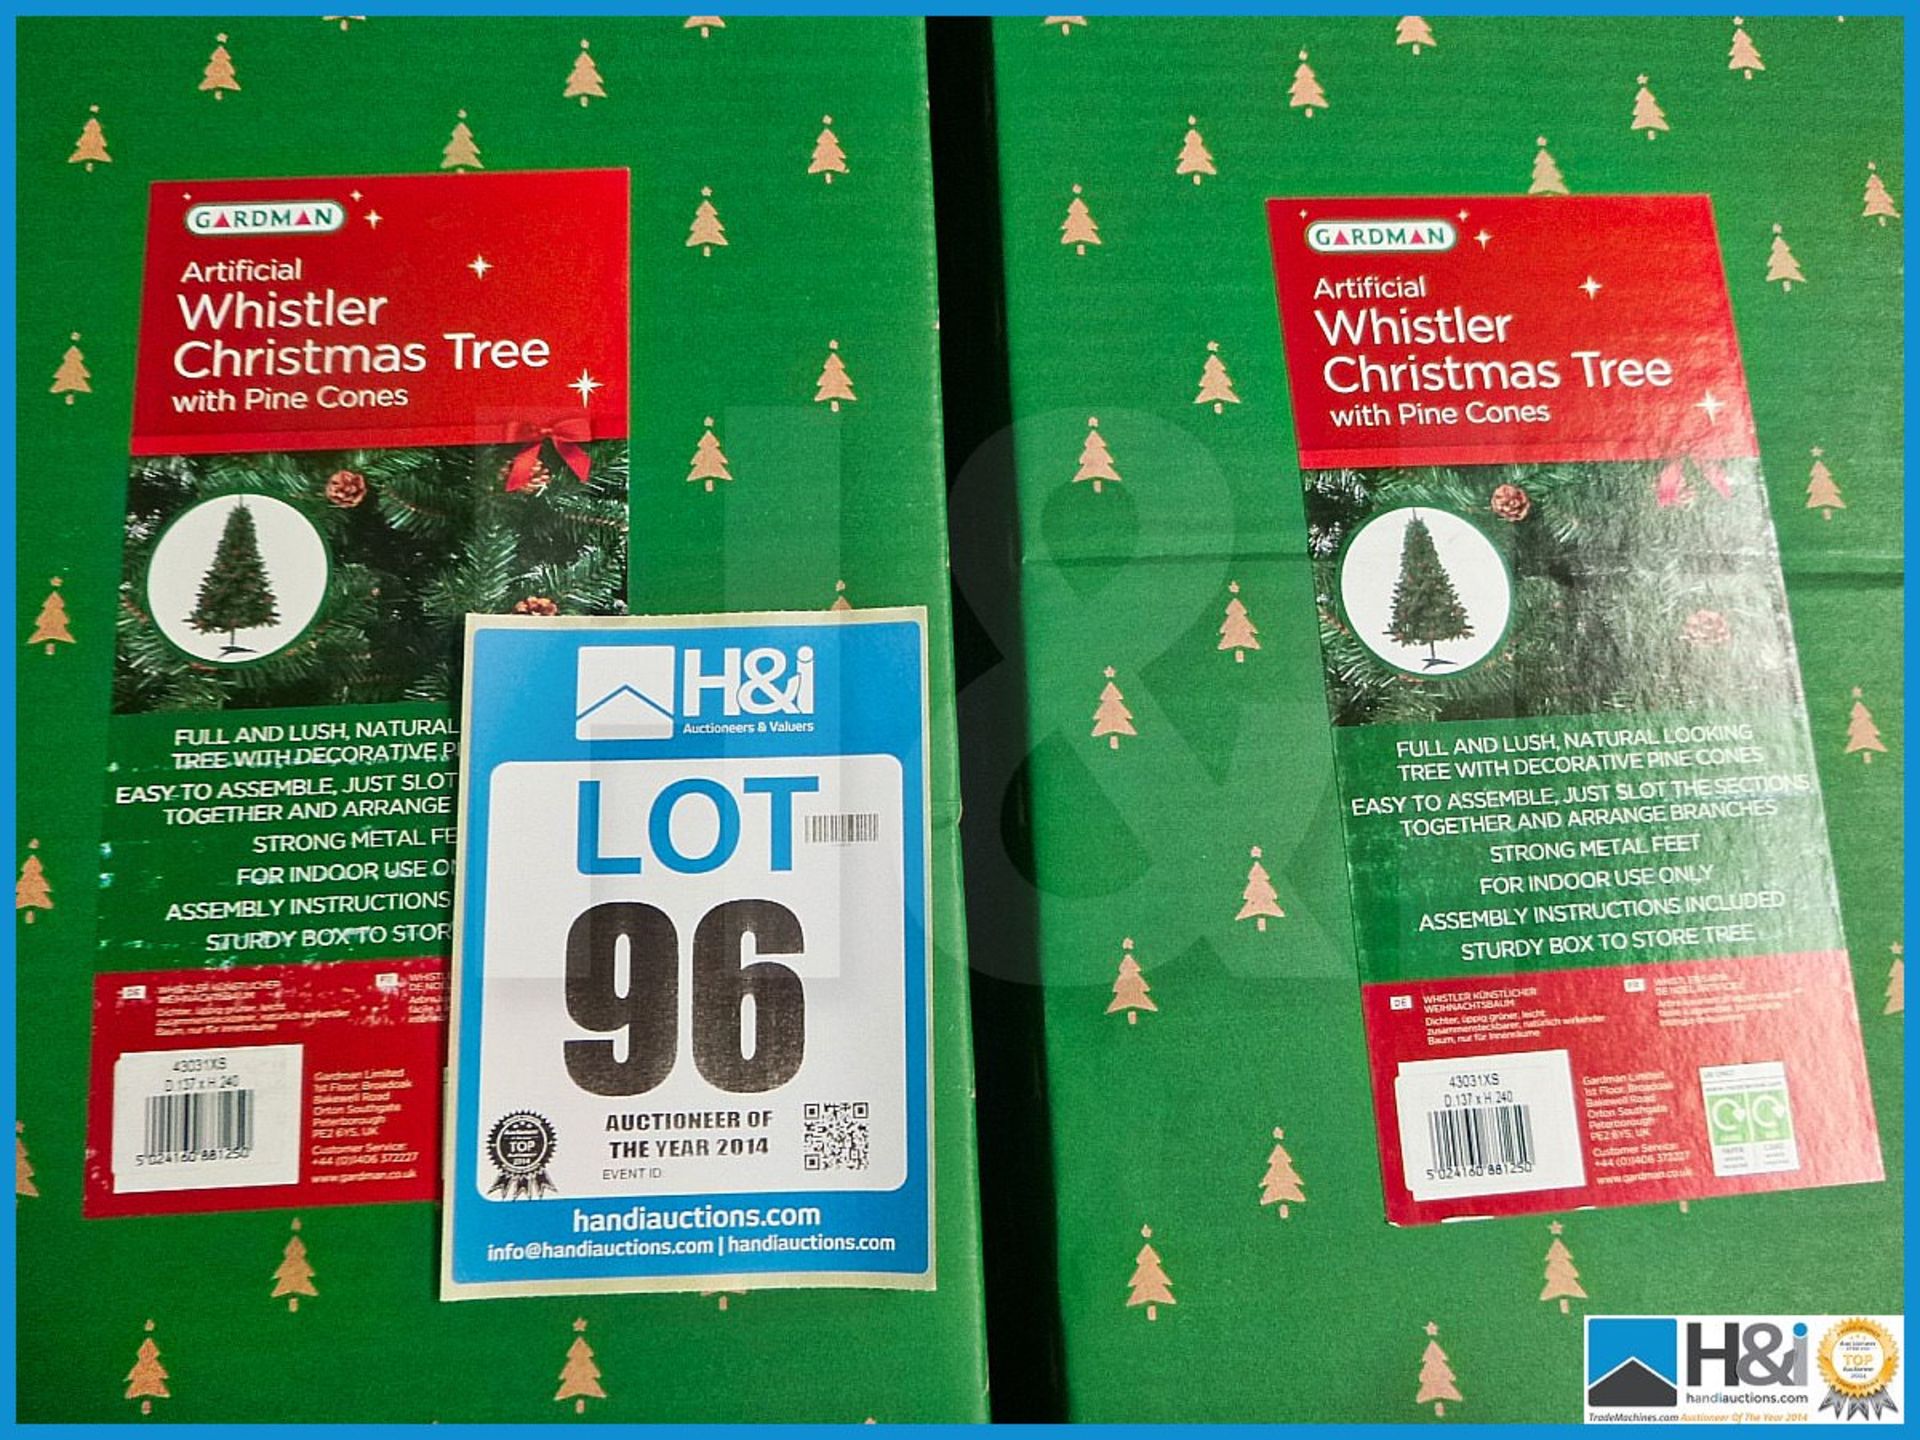 GARDMAN ARTIFICIAL 8' WHISTLER CHRISTMAS TREE WITH CONES , 43031XS, RRP £89.99, FULL AND LUSH NATURA